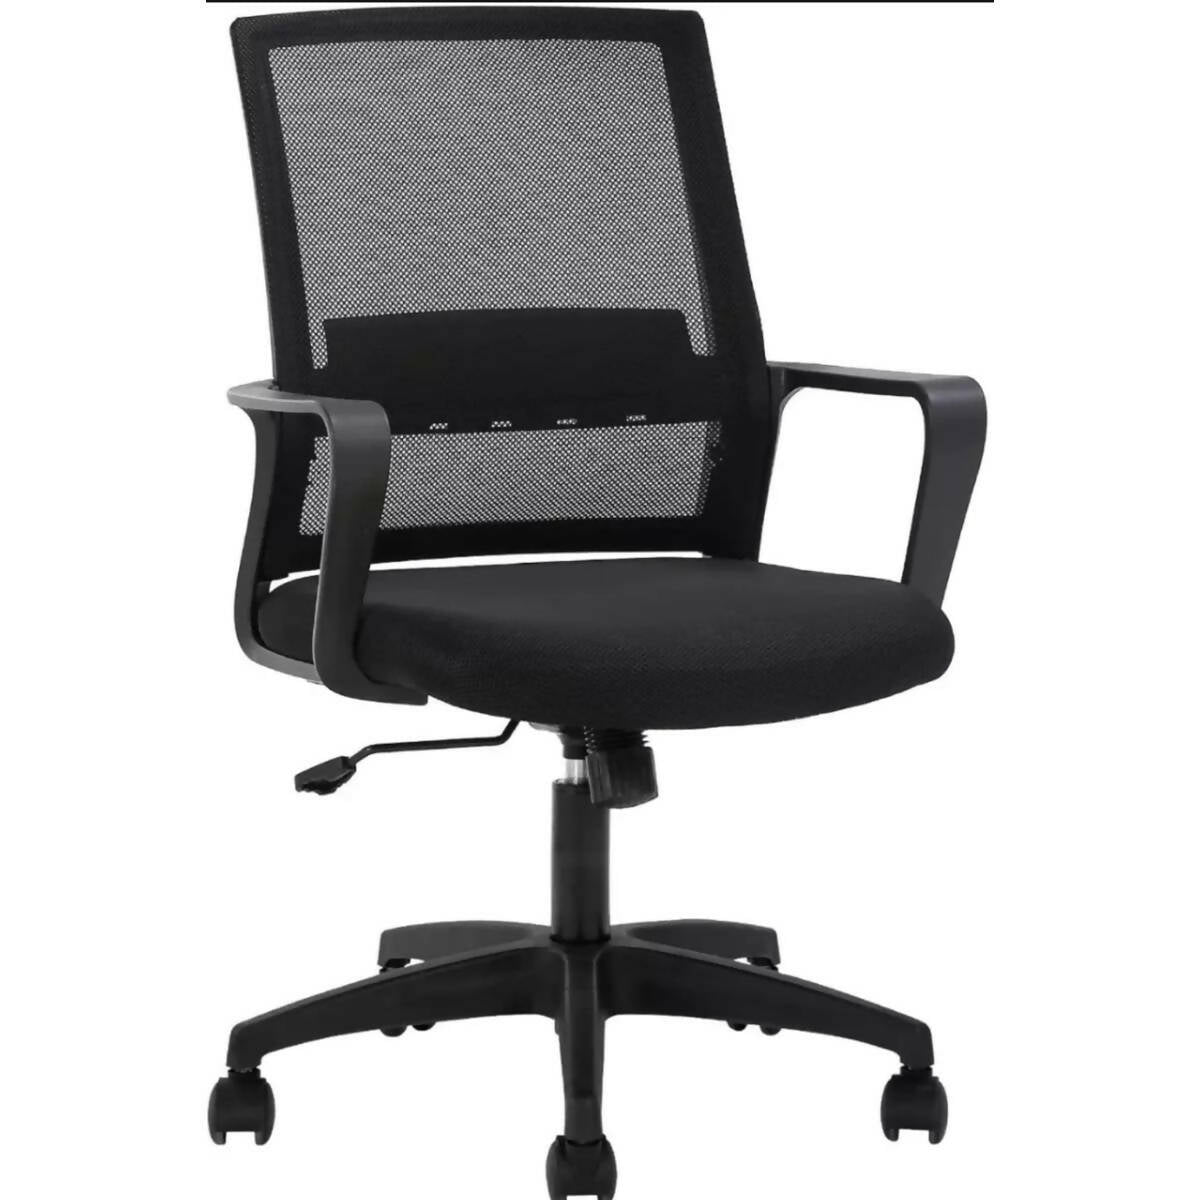 Home Office Chair Ergonomic Desk Chair Mid-Back Mesh Computer Chair Lumbar Support Comfortable Executive Adjustable Rolling Swivel Task Chair with Armrests,Black